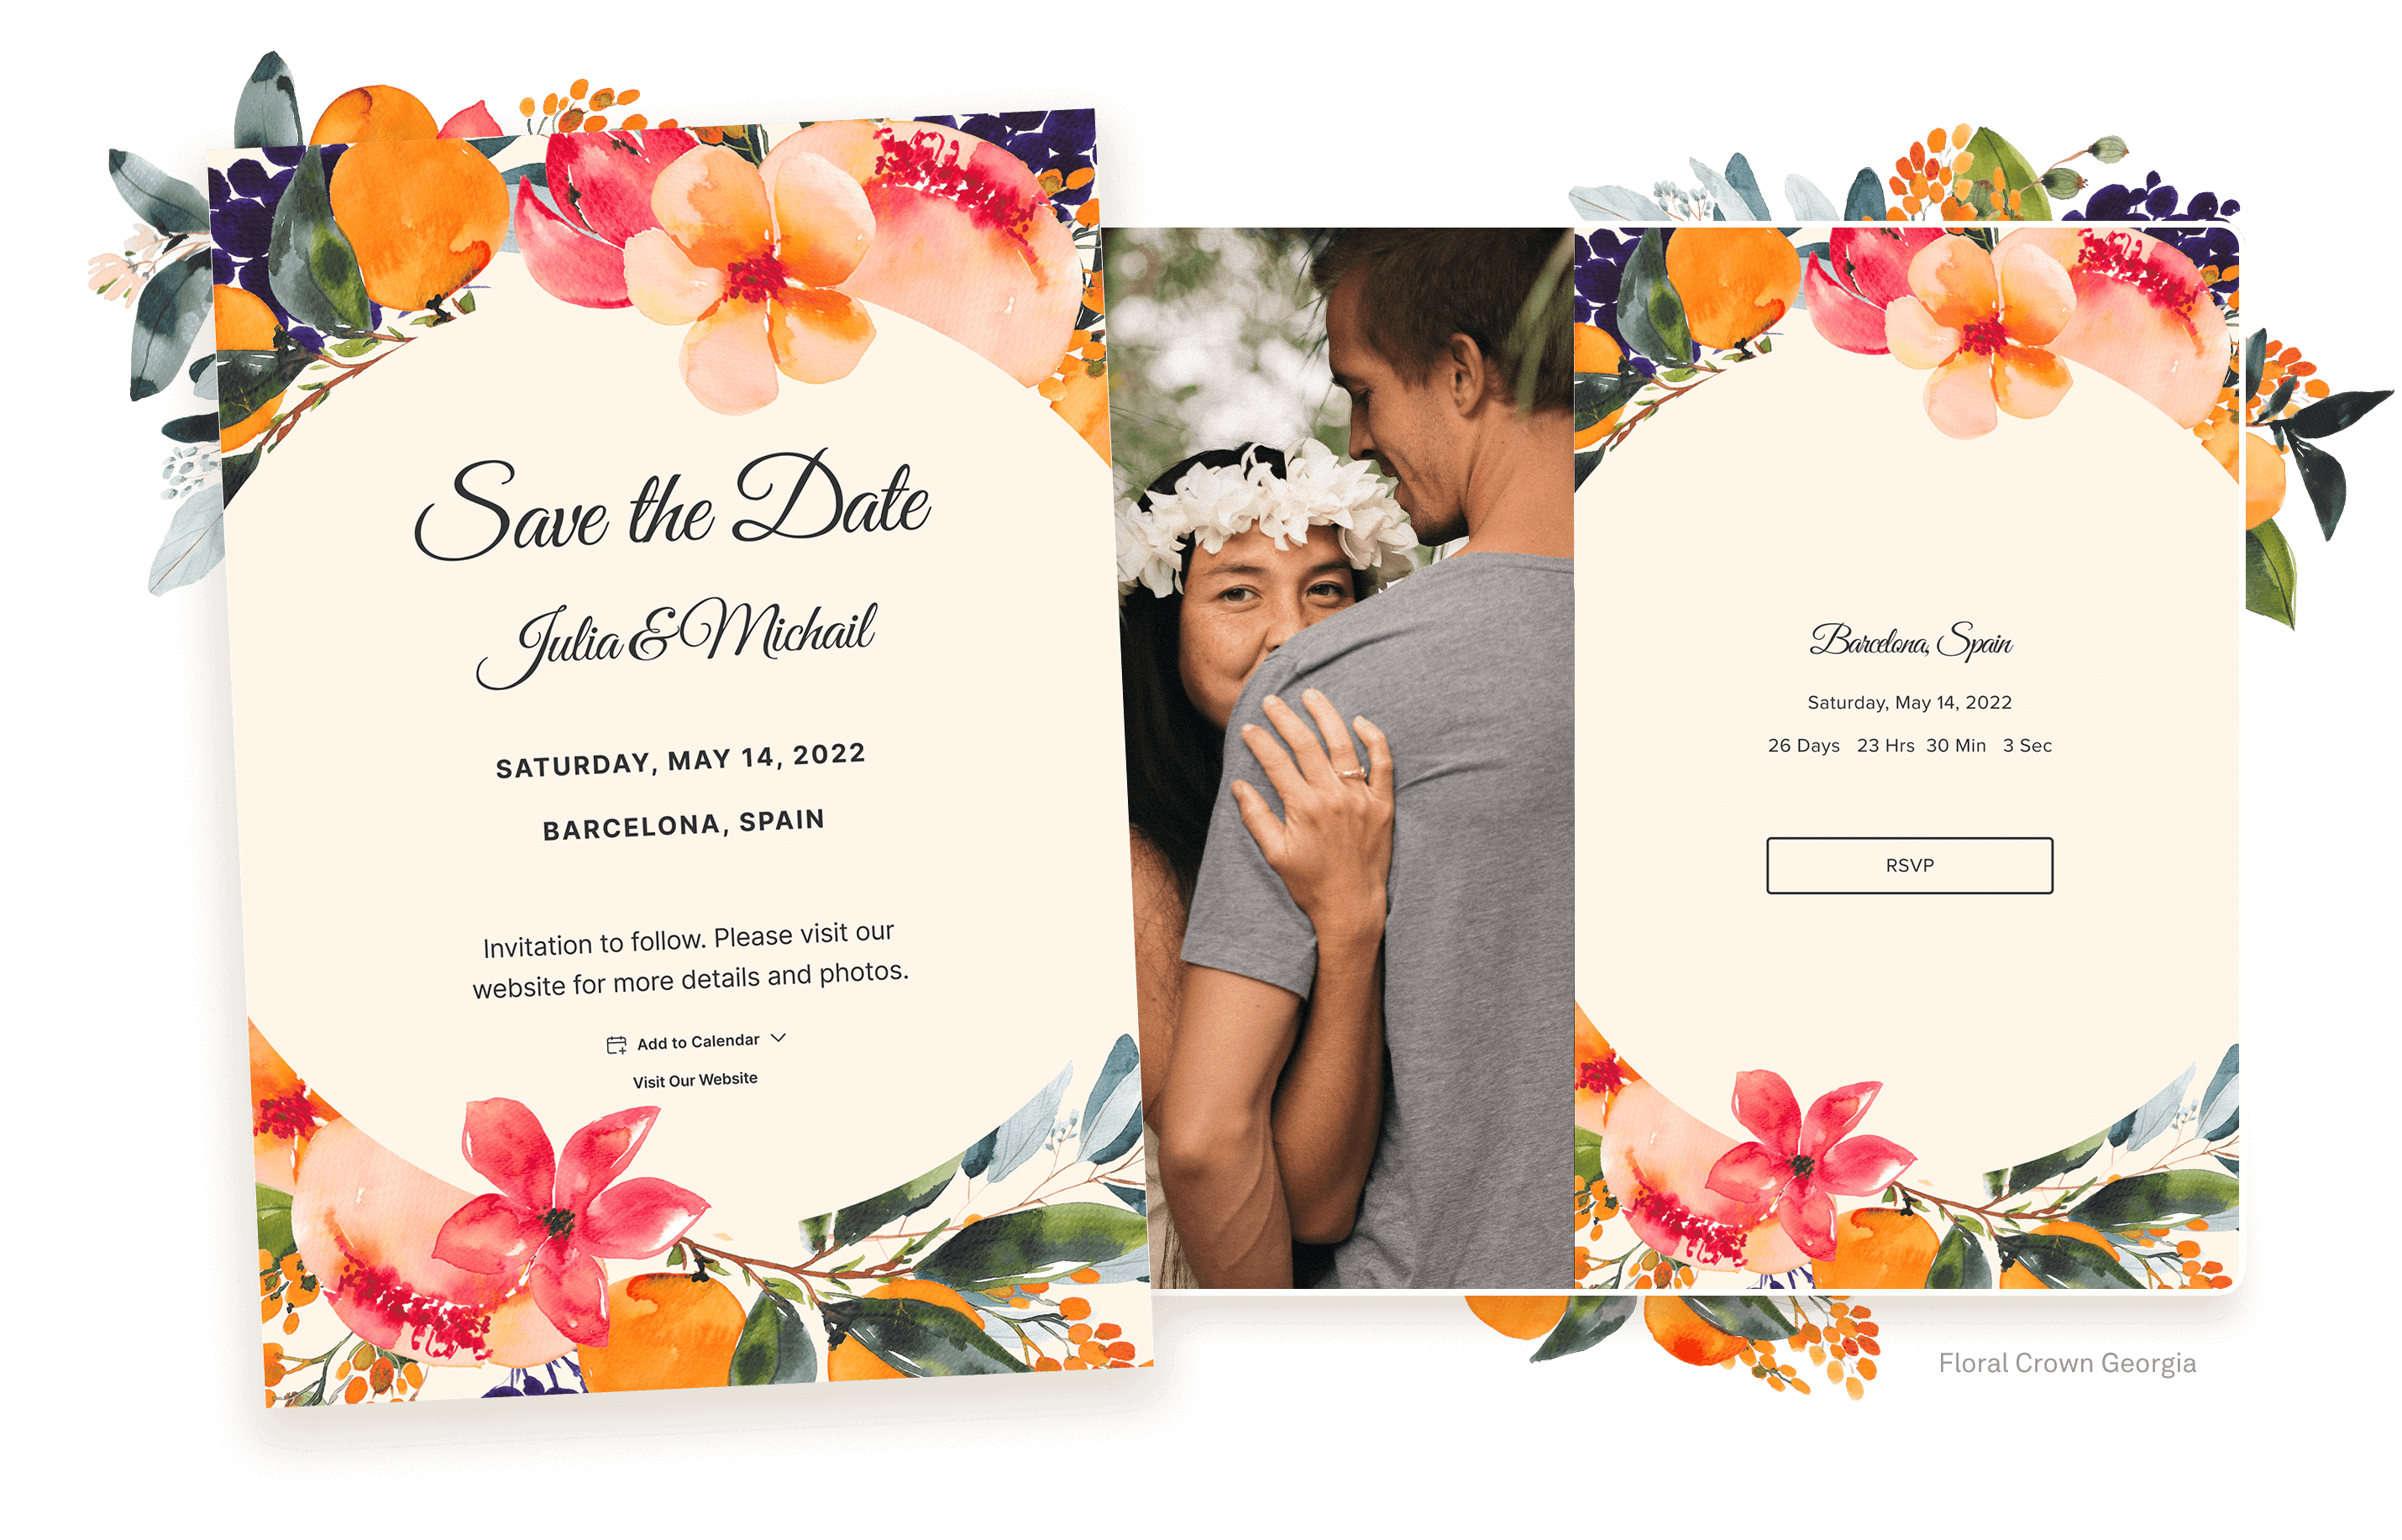 DIY Wedding Save the Date Evening Cards Write Your Own Invites Day Night RSVP 9 